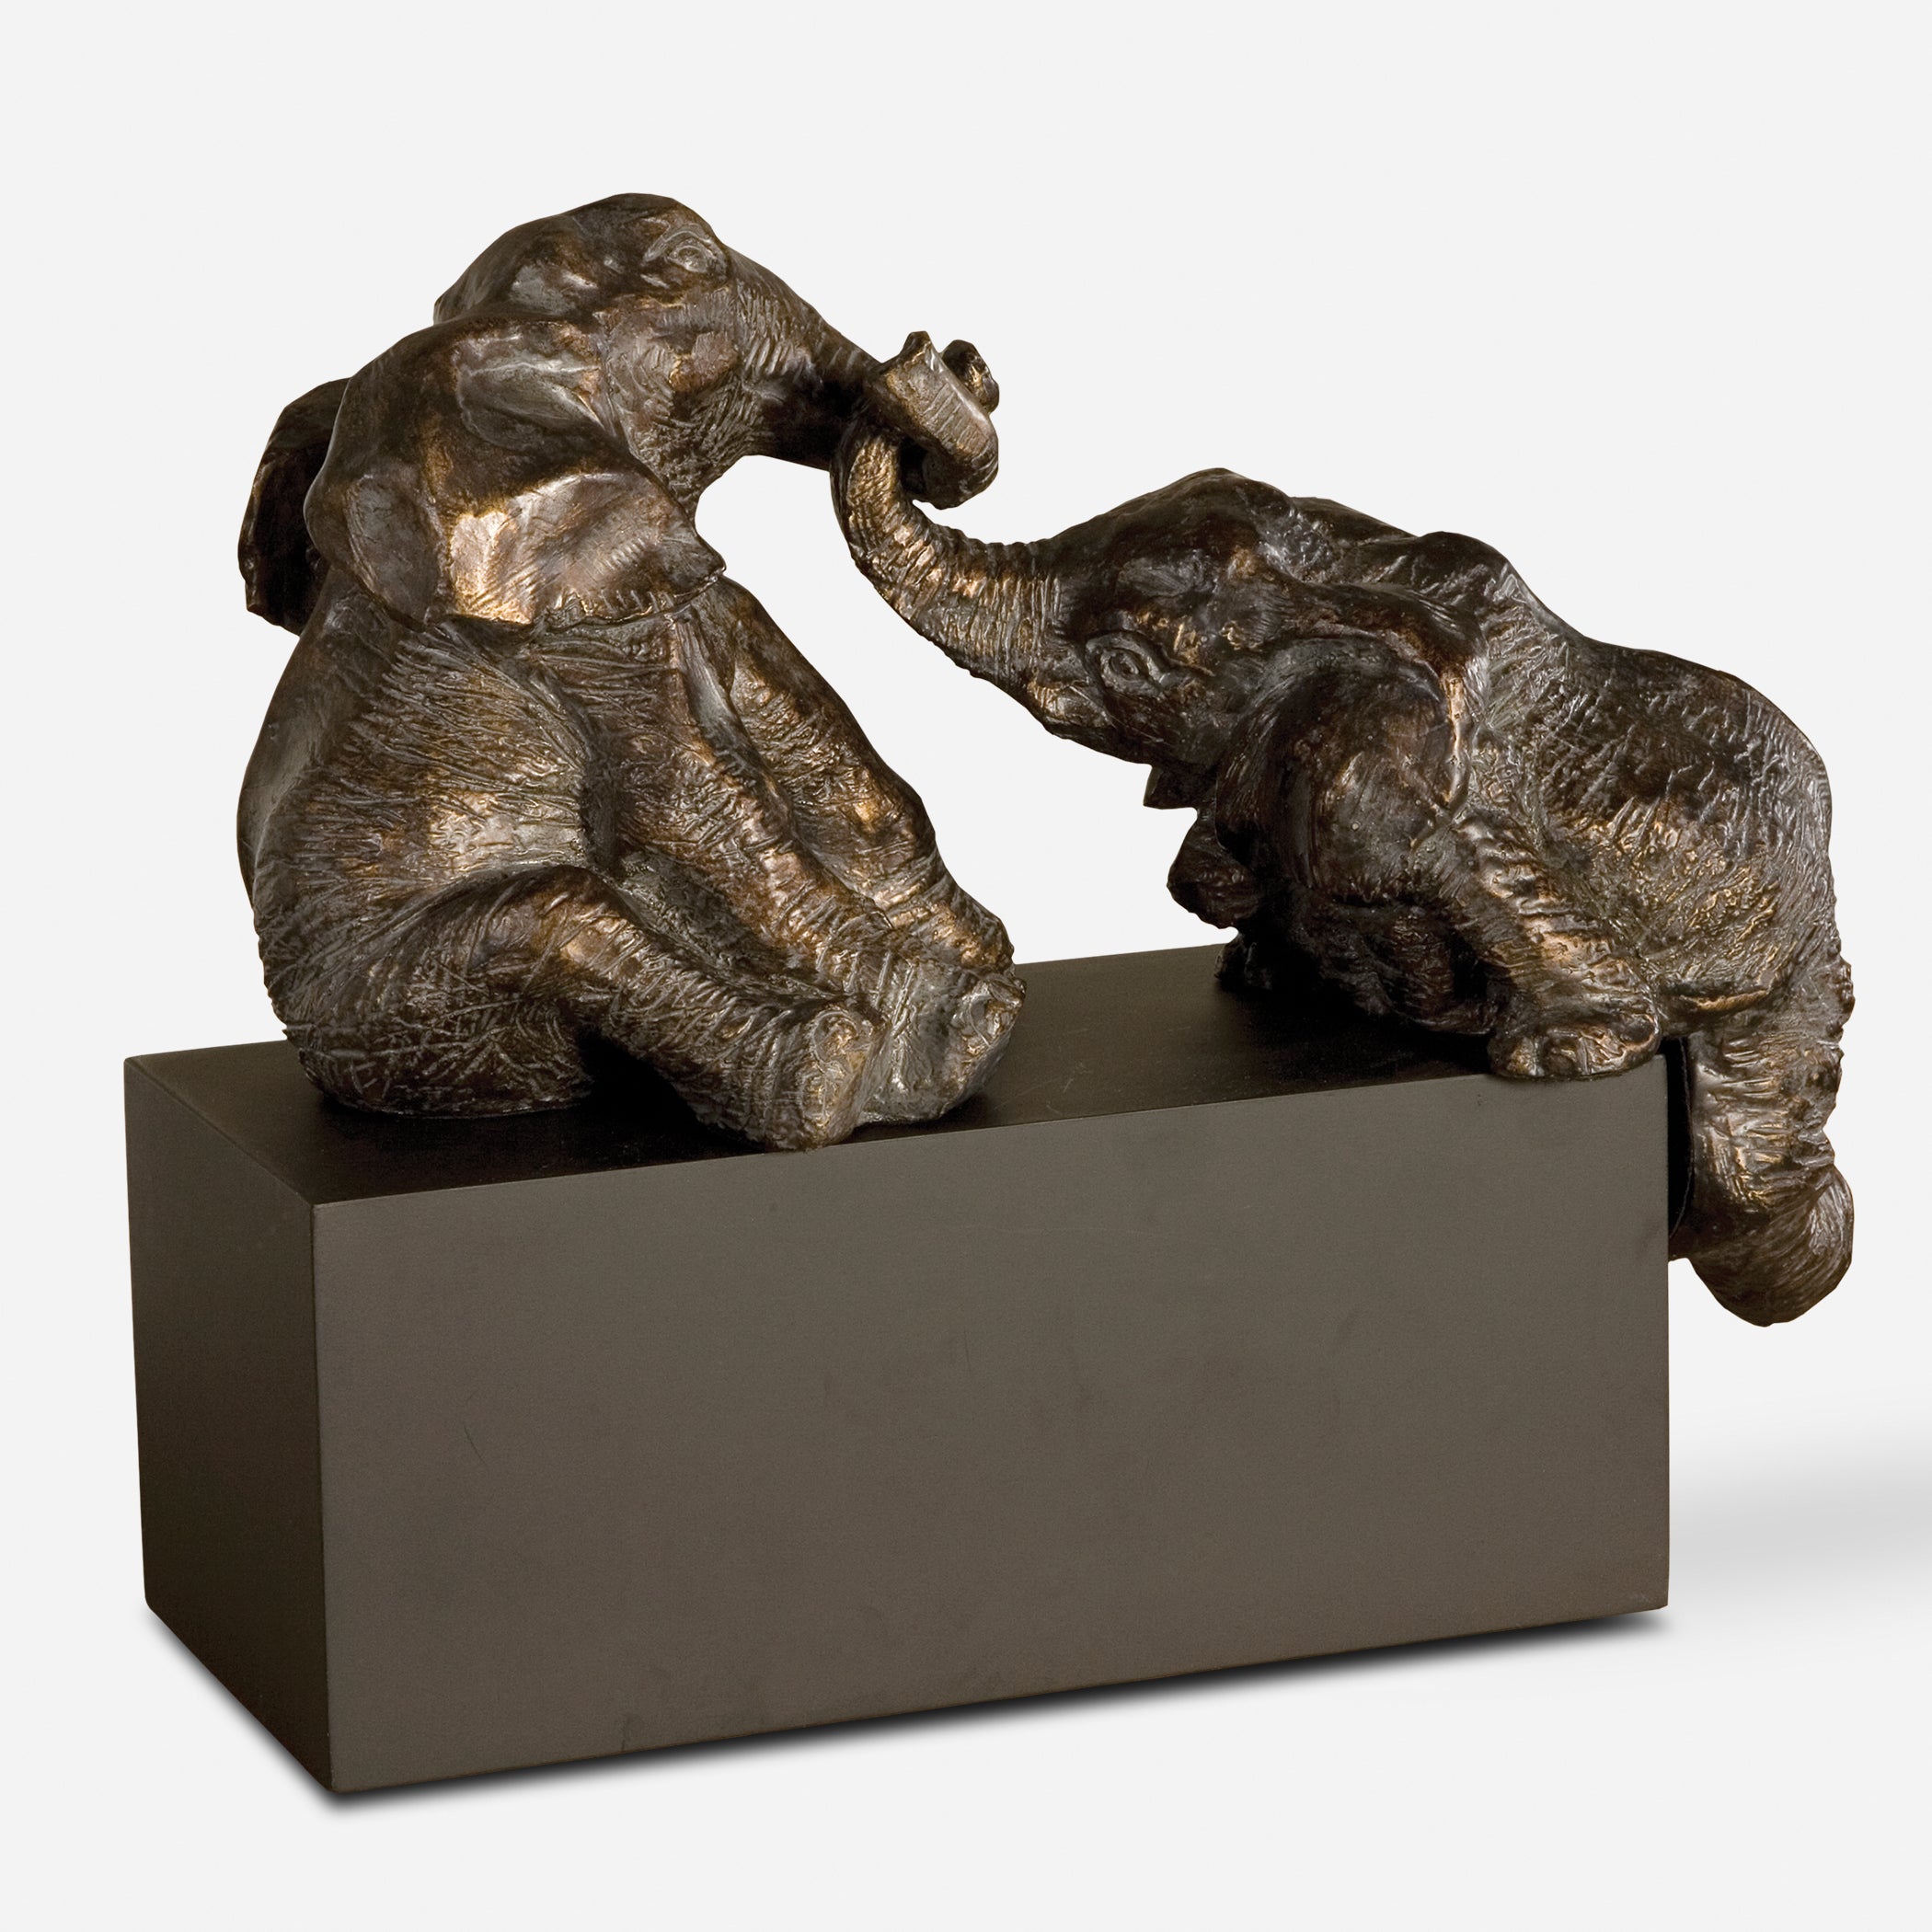 Uttermost Playful Pachyderms Figurines & Sculptures Figurines & Sculptures Uttermost   